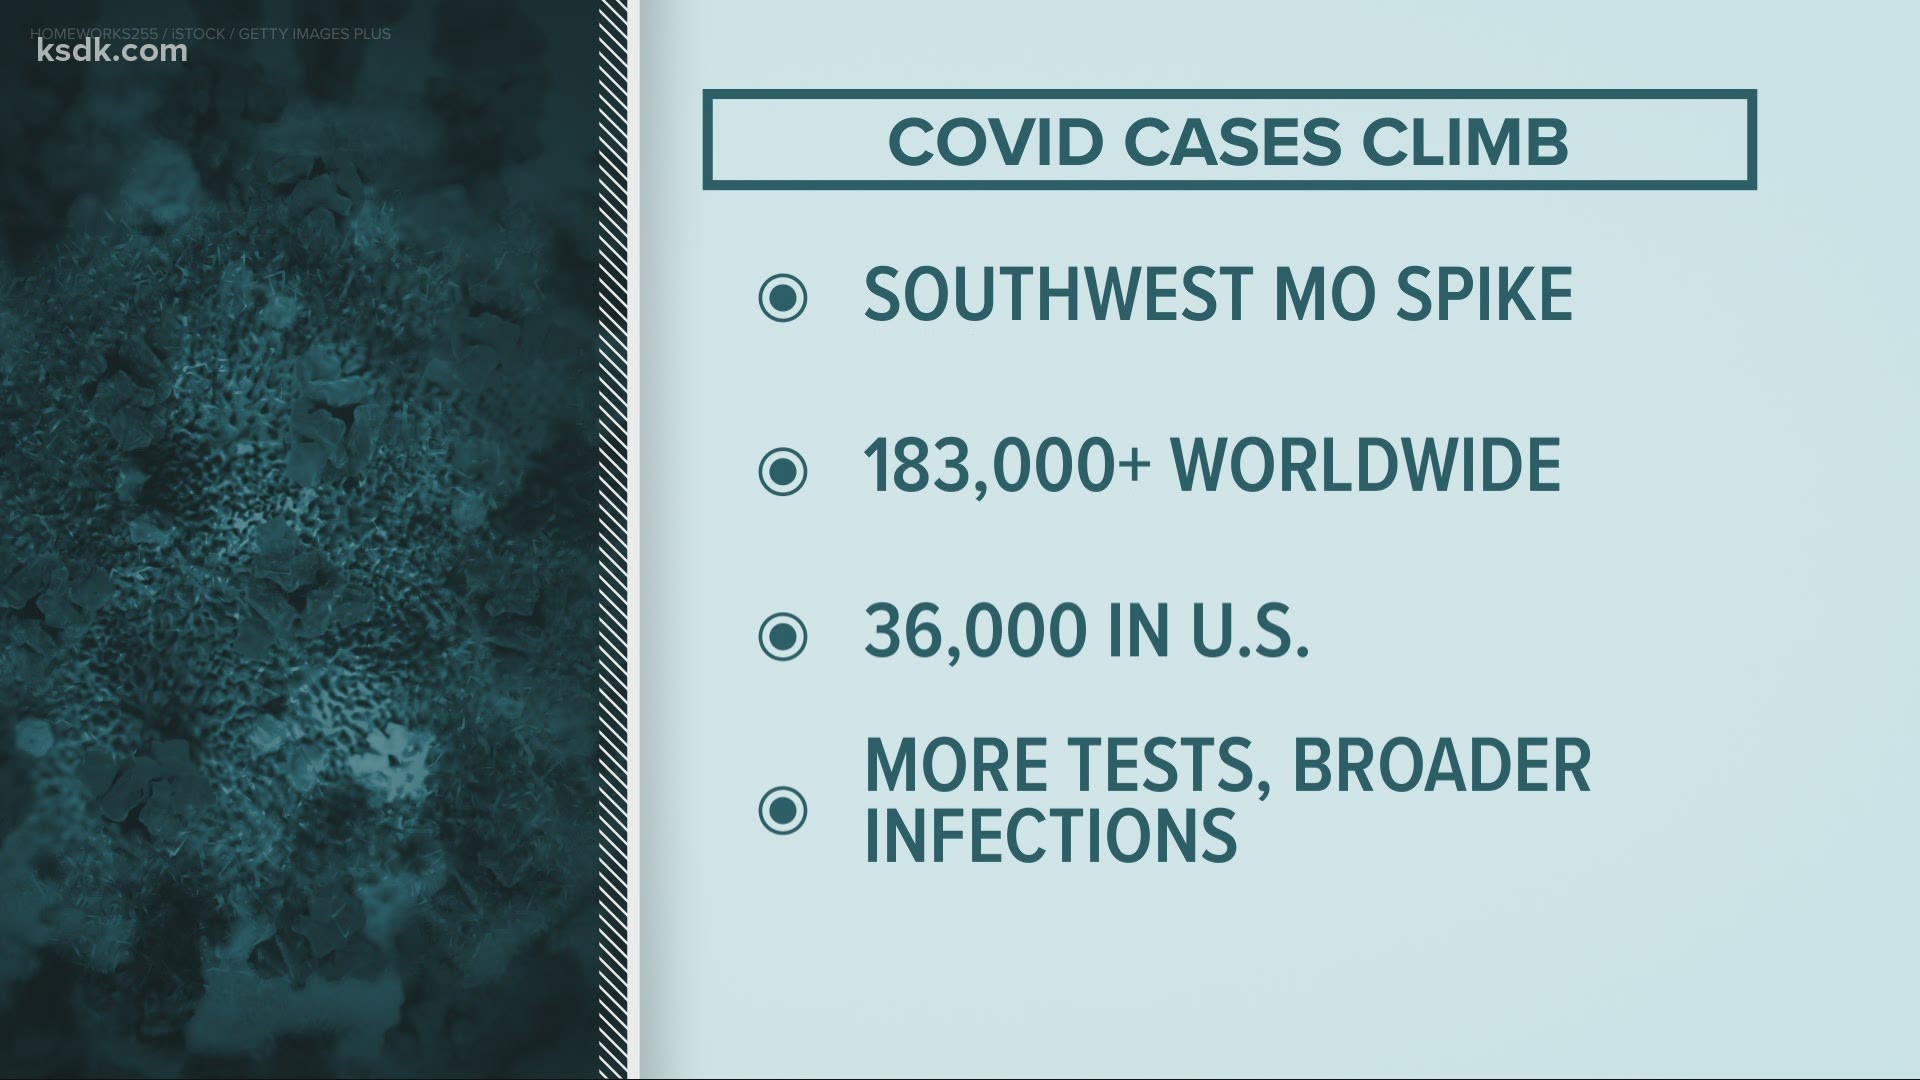 Experts are saying though COVID-19 cases have increased, we are not in the second wave.